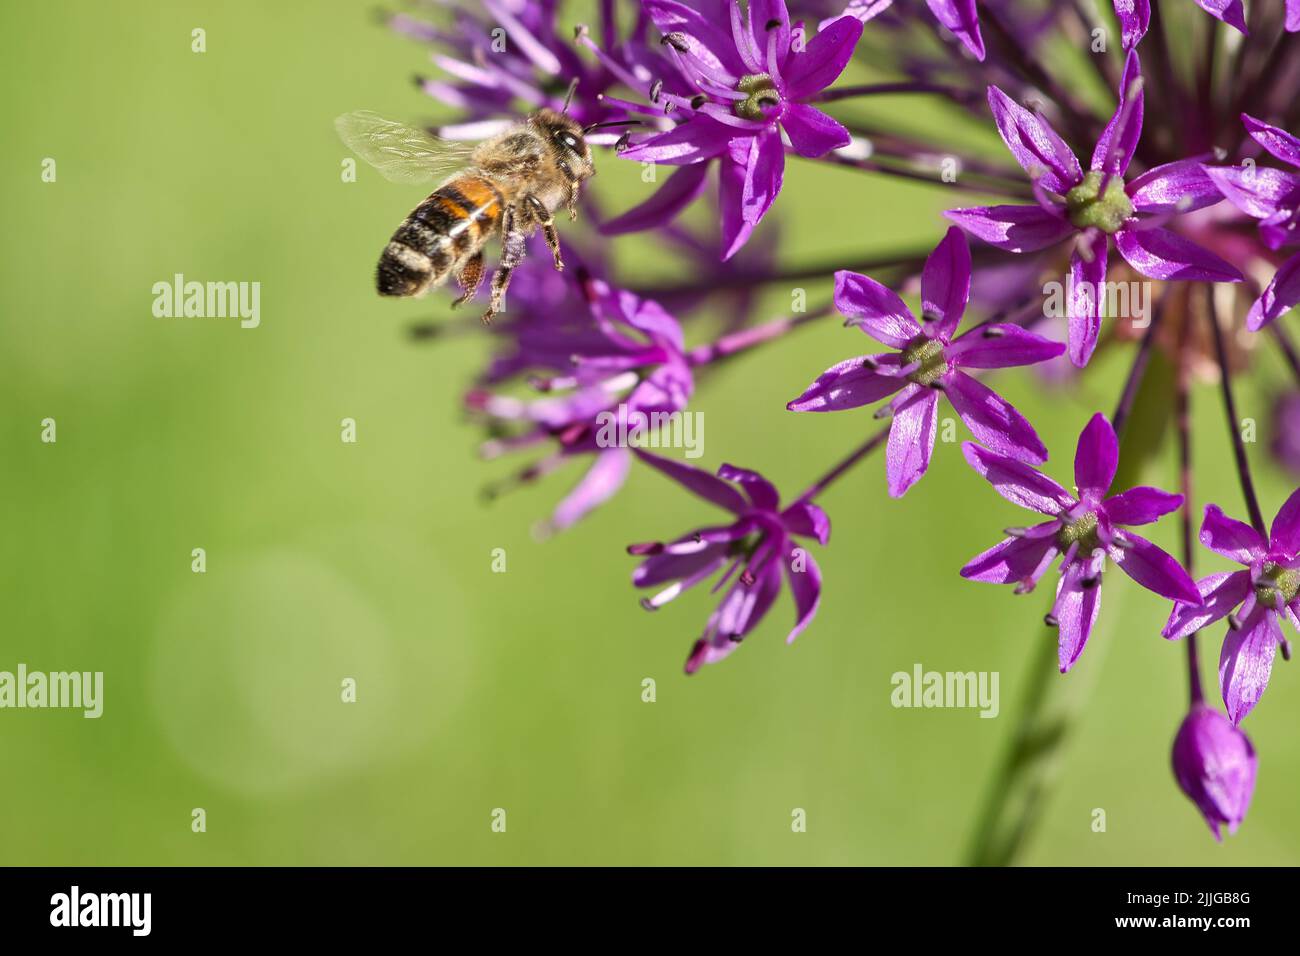 Honey bee collecting nectar in flight on a purple flower. Busy insect. Dynamically moving wings. Honey is harvested by bees. Animal photo from nature Stock Photo